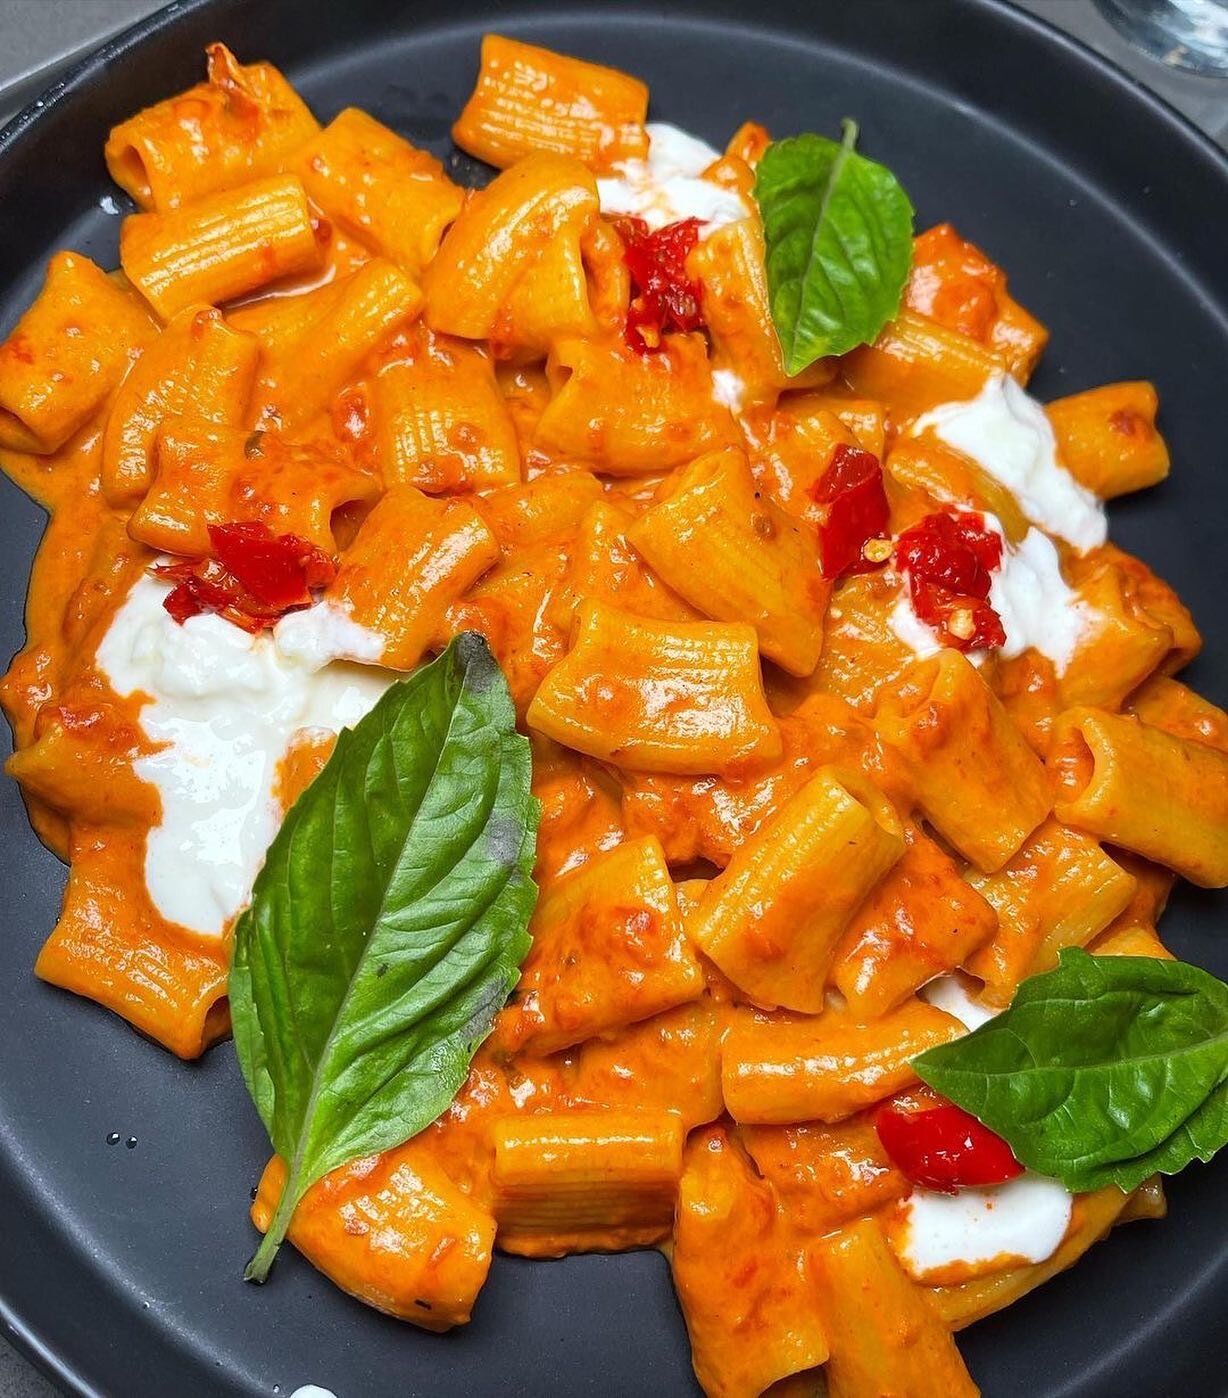 Any plans for #HumpDay? Try our delicious RIGATONI VODKA! 🔥🍝
📸: @nyplatechaser
The #1653PIZZACOMPANY is now OPEN‼️
#Huntington #LongIsland